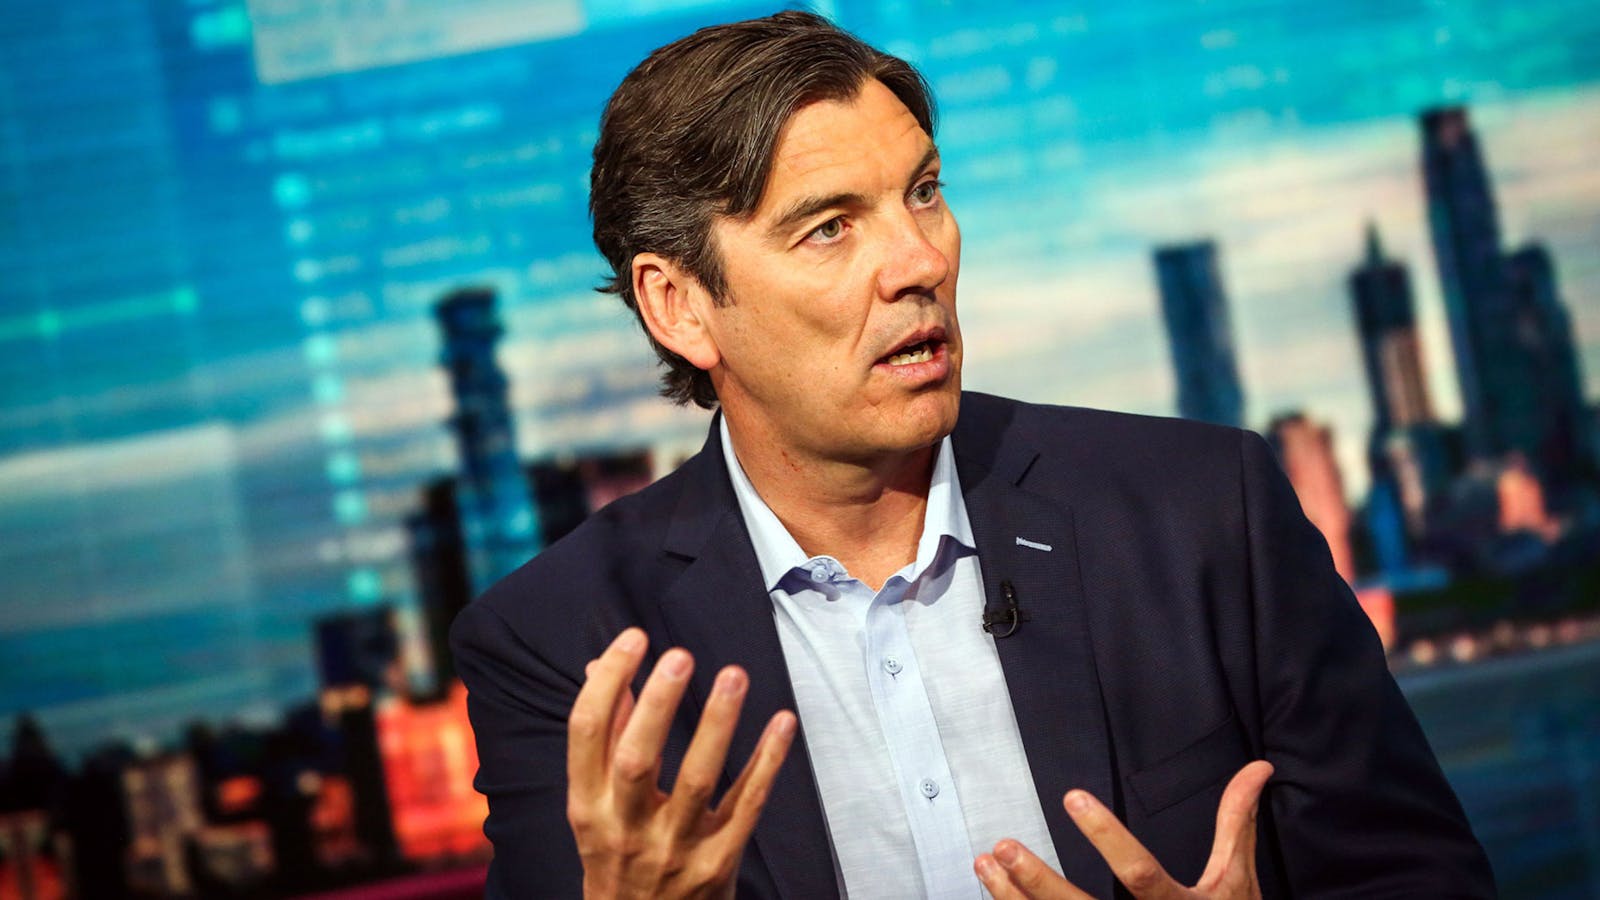 Tim Armstrong. Photo by Bloomberg